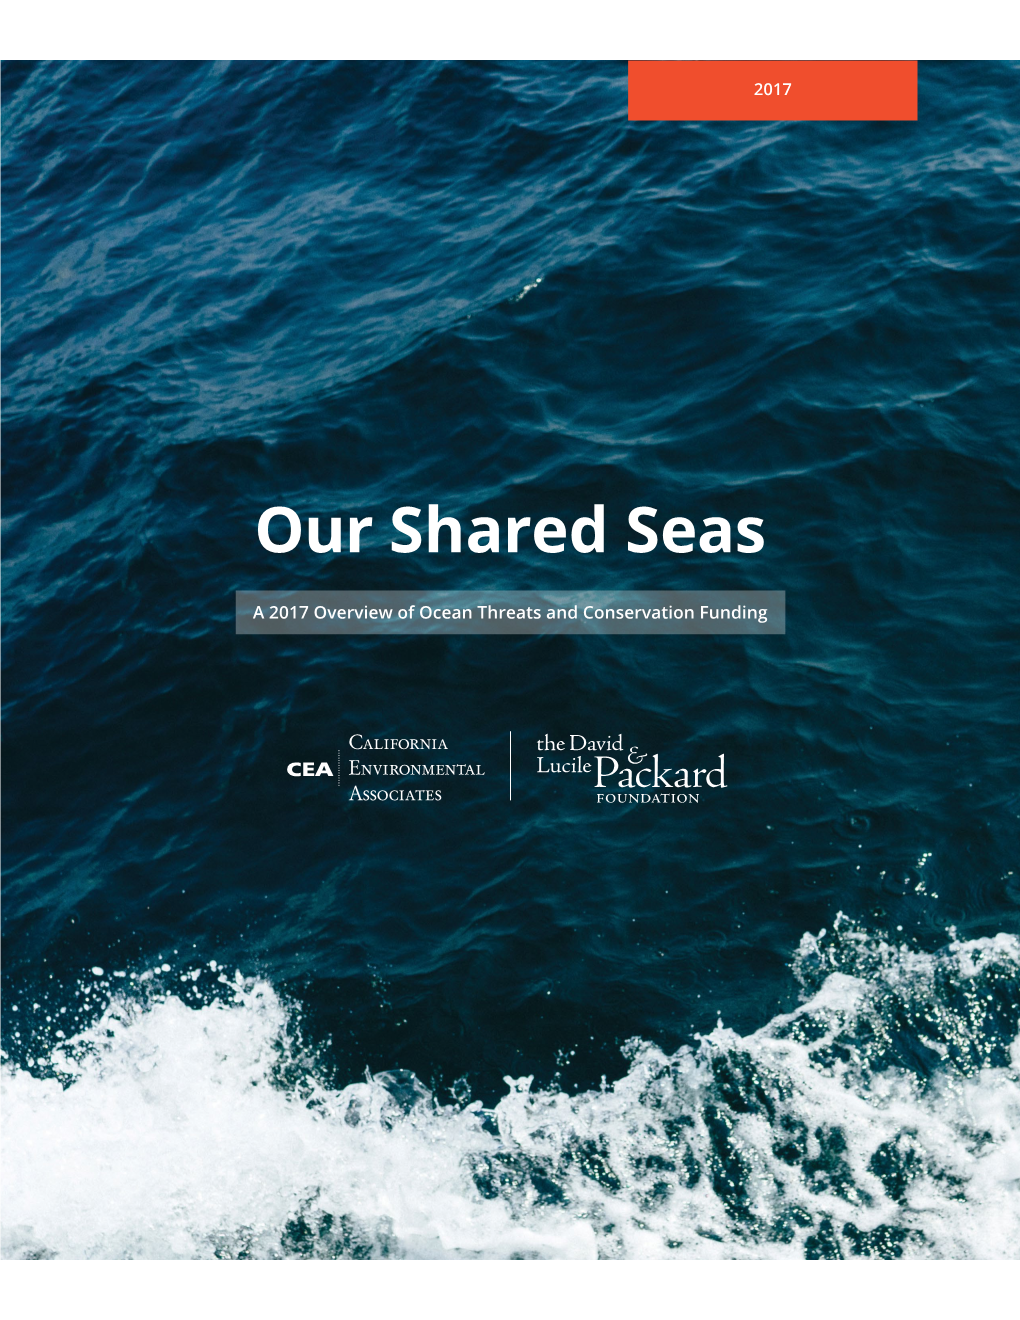 Our Shared Seas